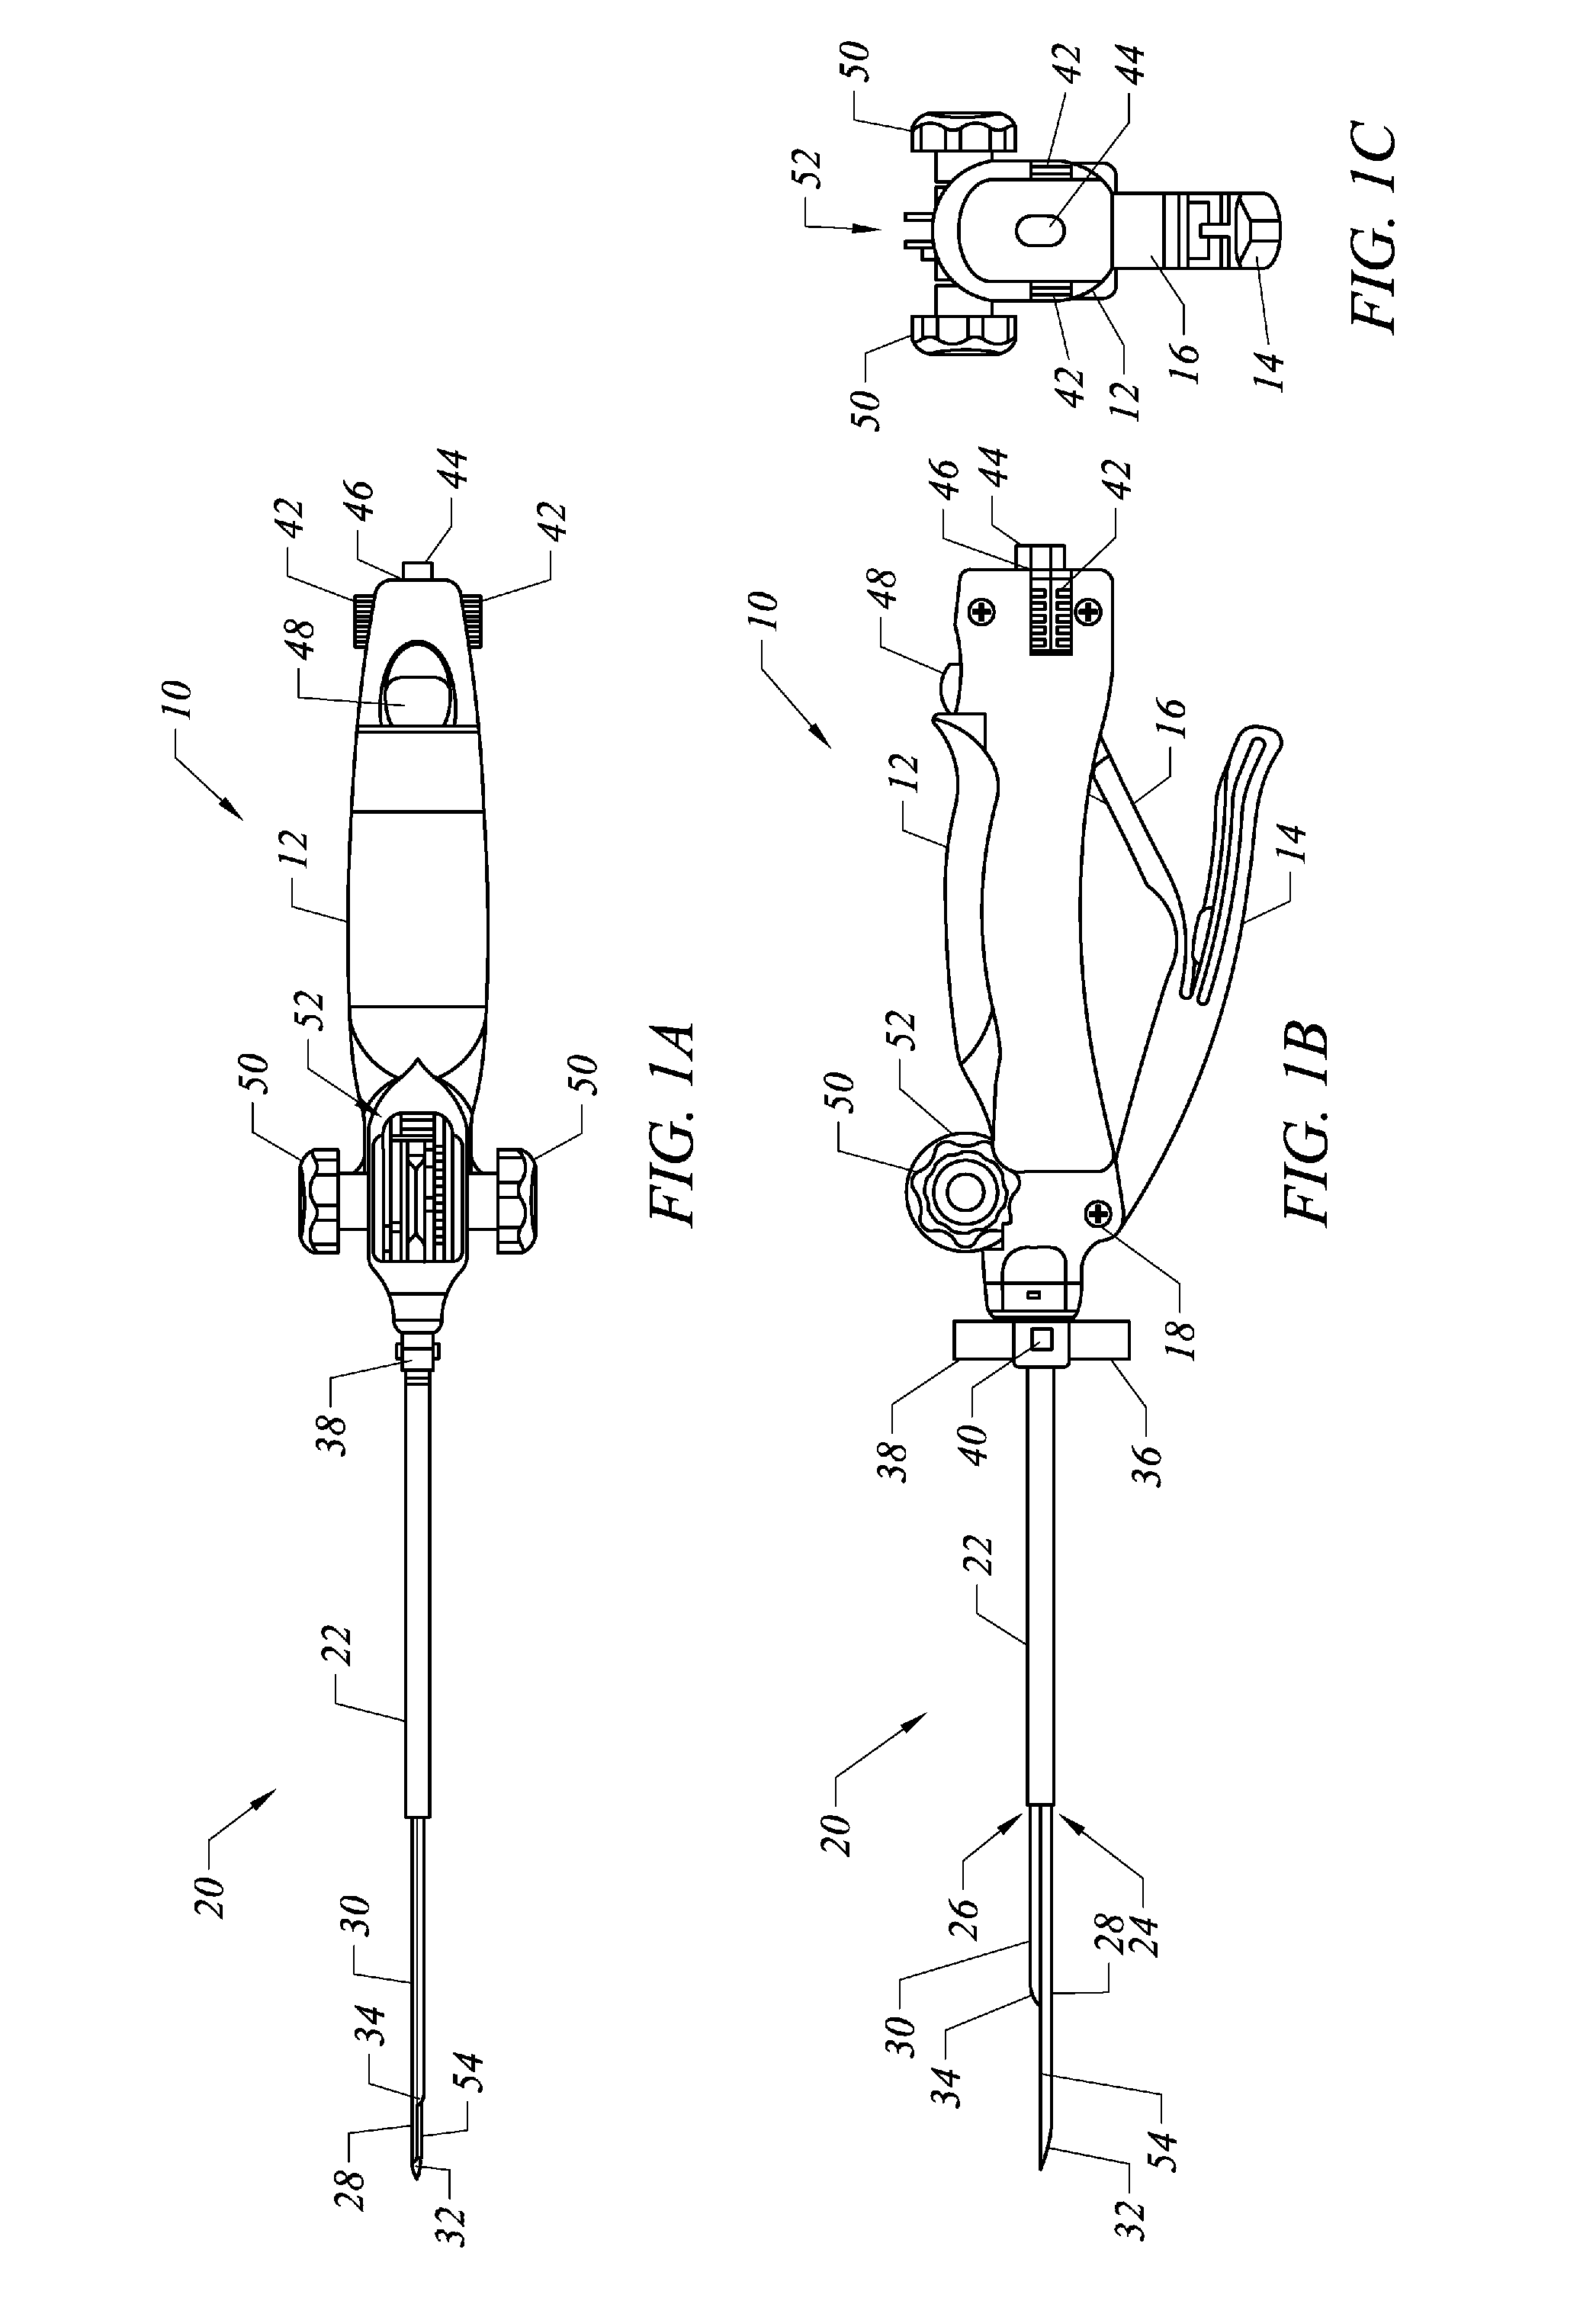 Implant and delivery system for soft tissue repair